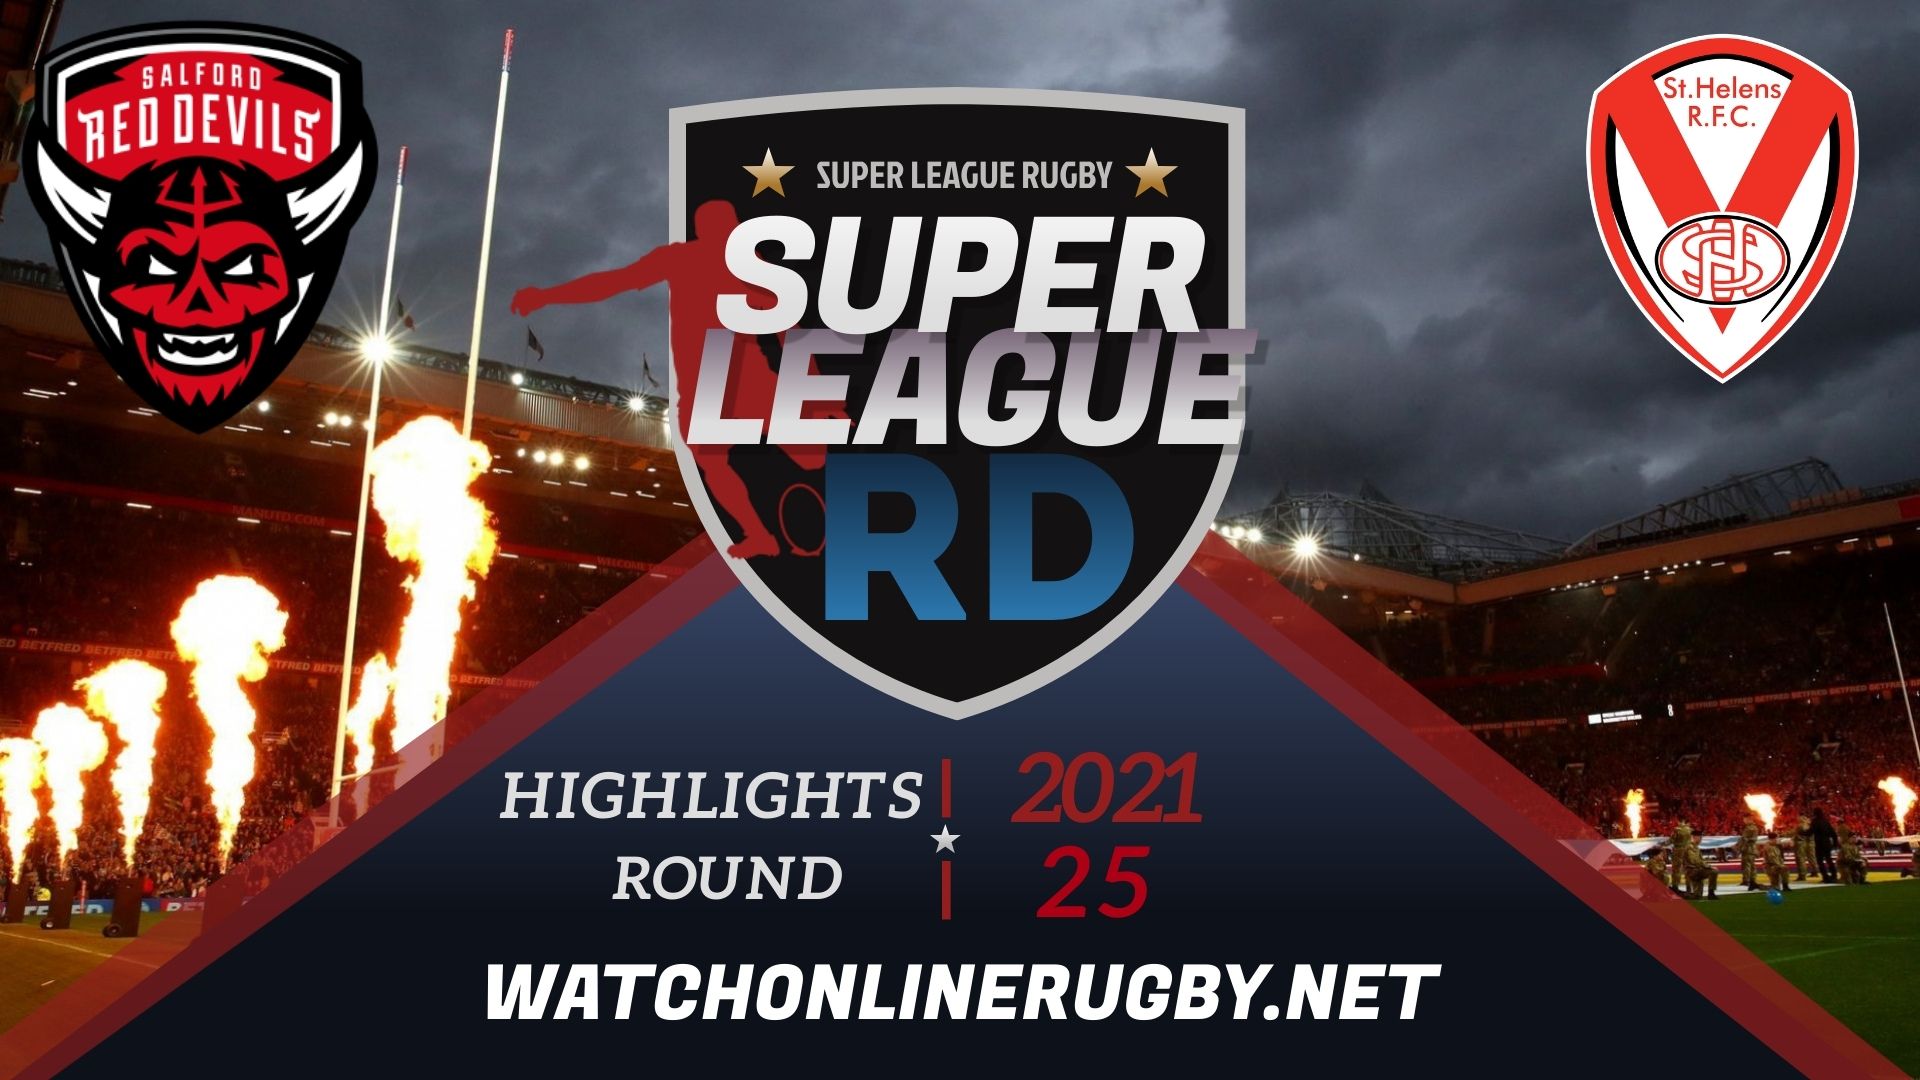 Salford Red Devils Vs St Helens Super League Rugby 2021 RD 25